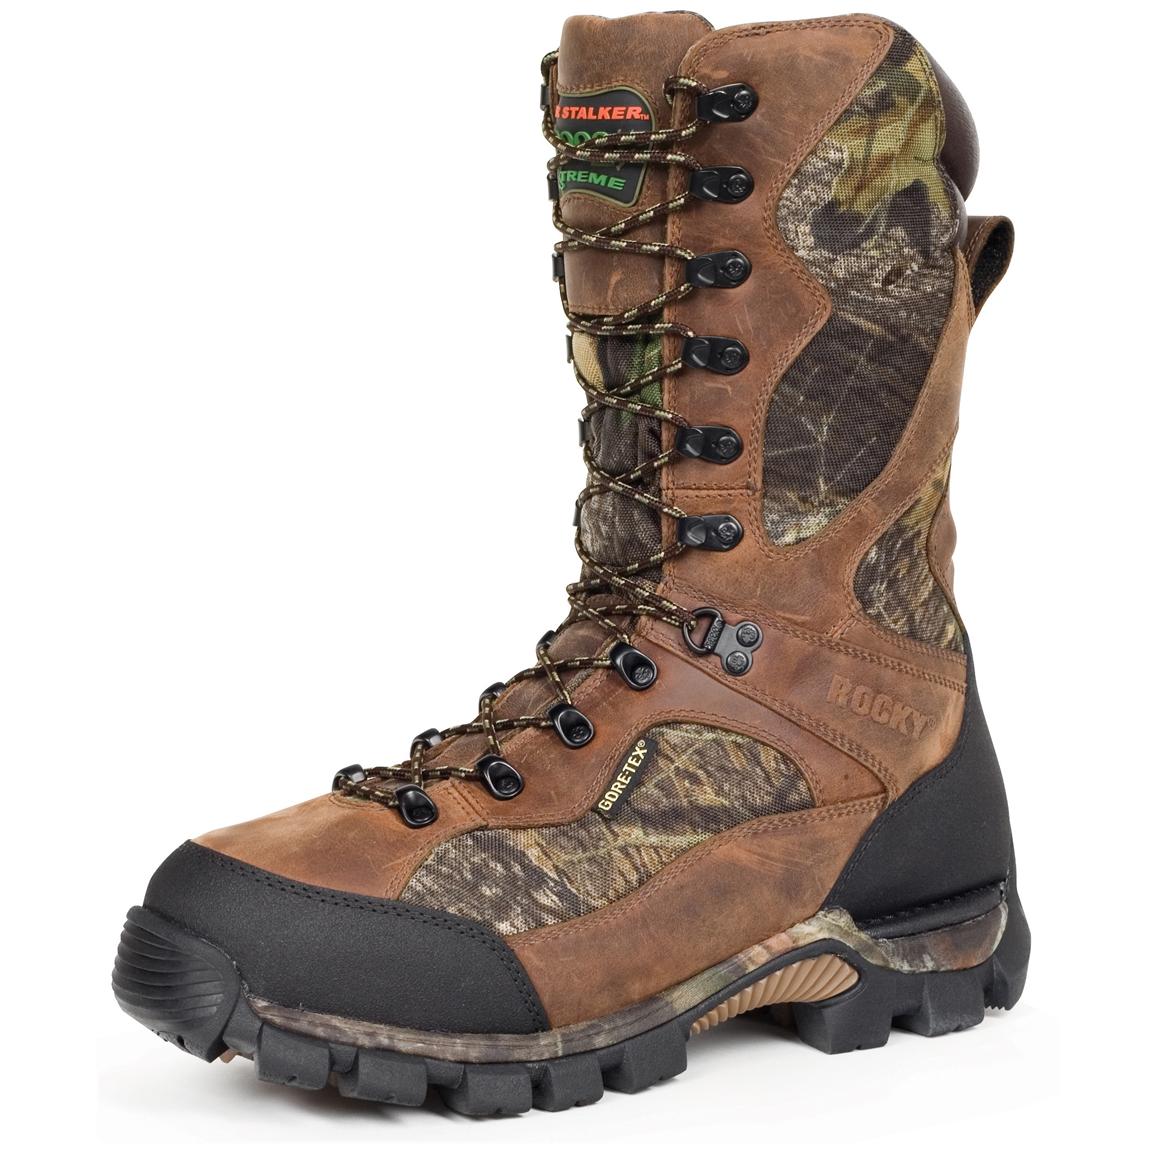 Buy > 2000 gram insulated hunting boots > in stock